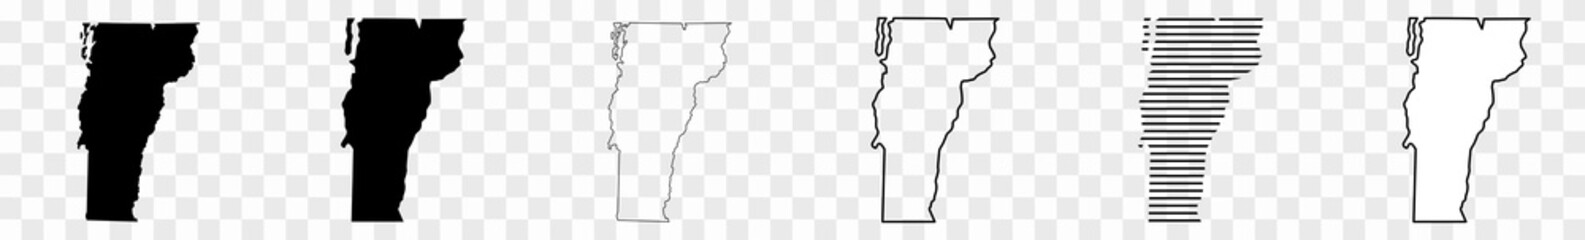 Vermont Map Black | State Border | United States | US America | Transparent Isolated | Variations